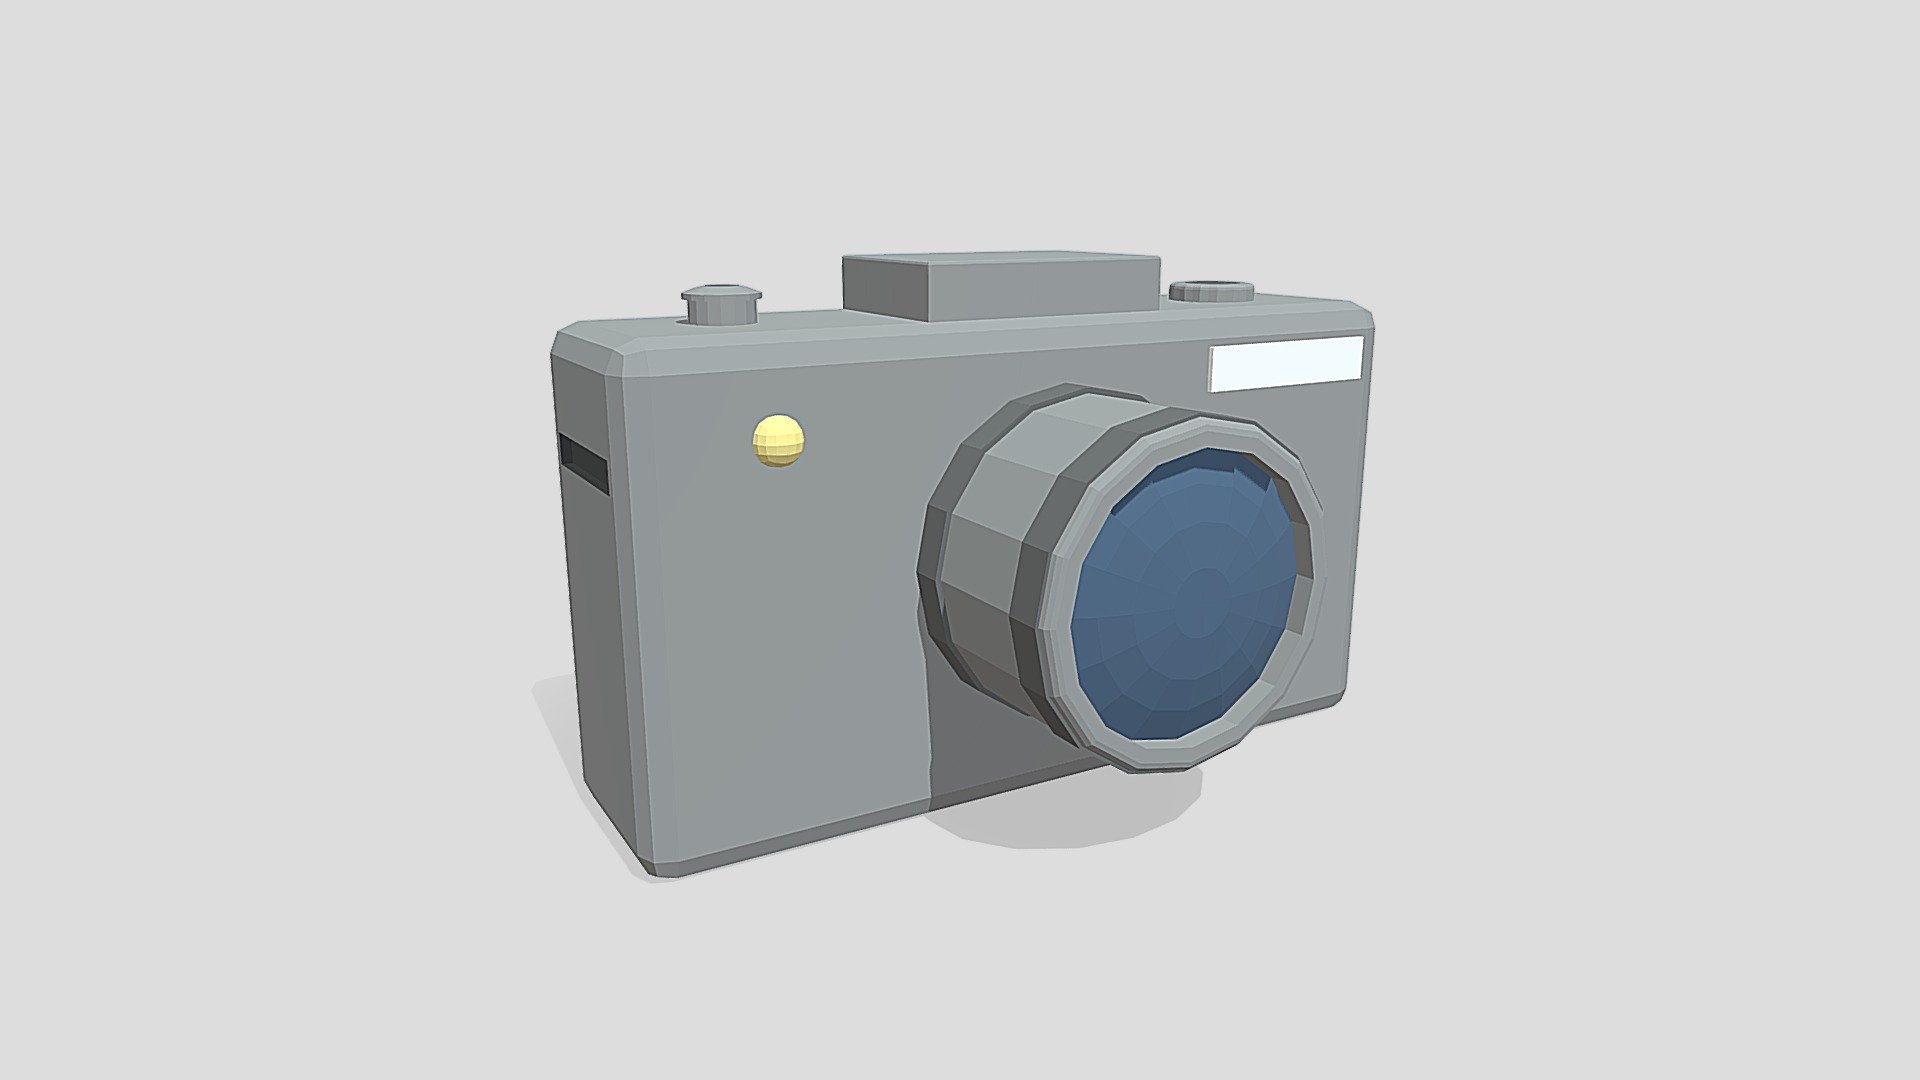 This is a low poly 3D model of a photo camera. The low poly camera was modeled and prepared for low-poly style renderings, background, general CG visualization presented as a mesh with quads only.

Verts : 920 Faces : 874.

The 3D model have simple materials with diffuse colors.

No ring, maps and no UVW mapping is available.

The original file was created in blender. You will receive a 3DS, OBJ, FBX, blend, DAE, Stl, gLTF.

Product is ready to render out-of-the-box. Please note that the lights, cameras, and background is only included in the .blend file. The model is clean and alone in the other provided files, centred at origin and has real-world scale 3d model